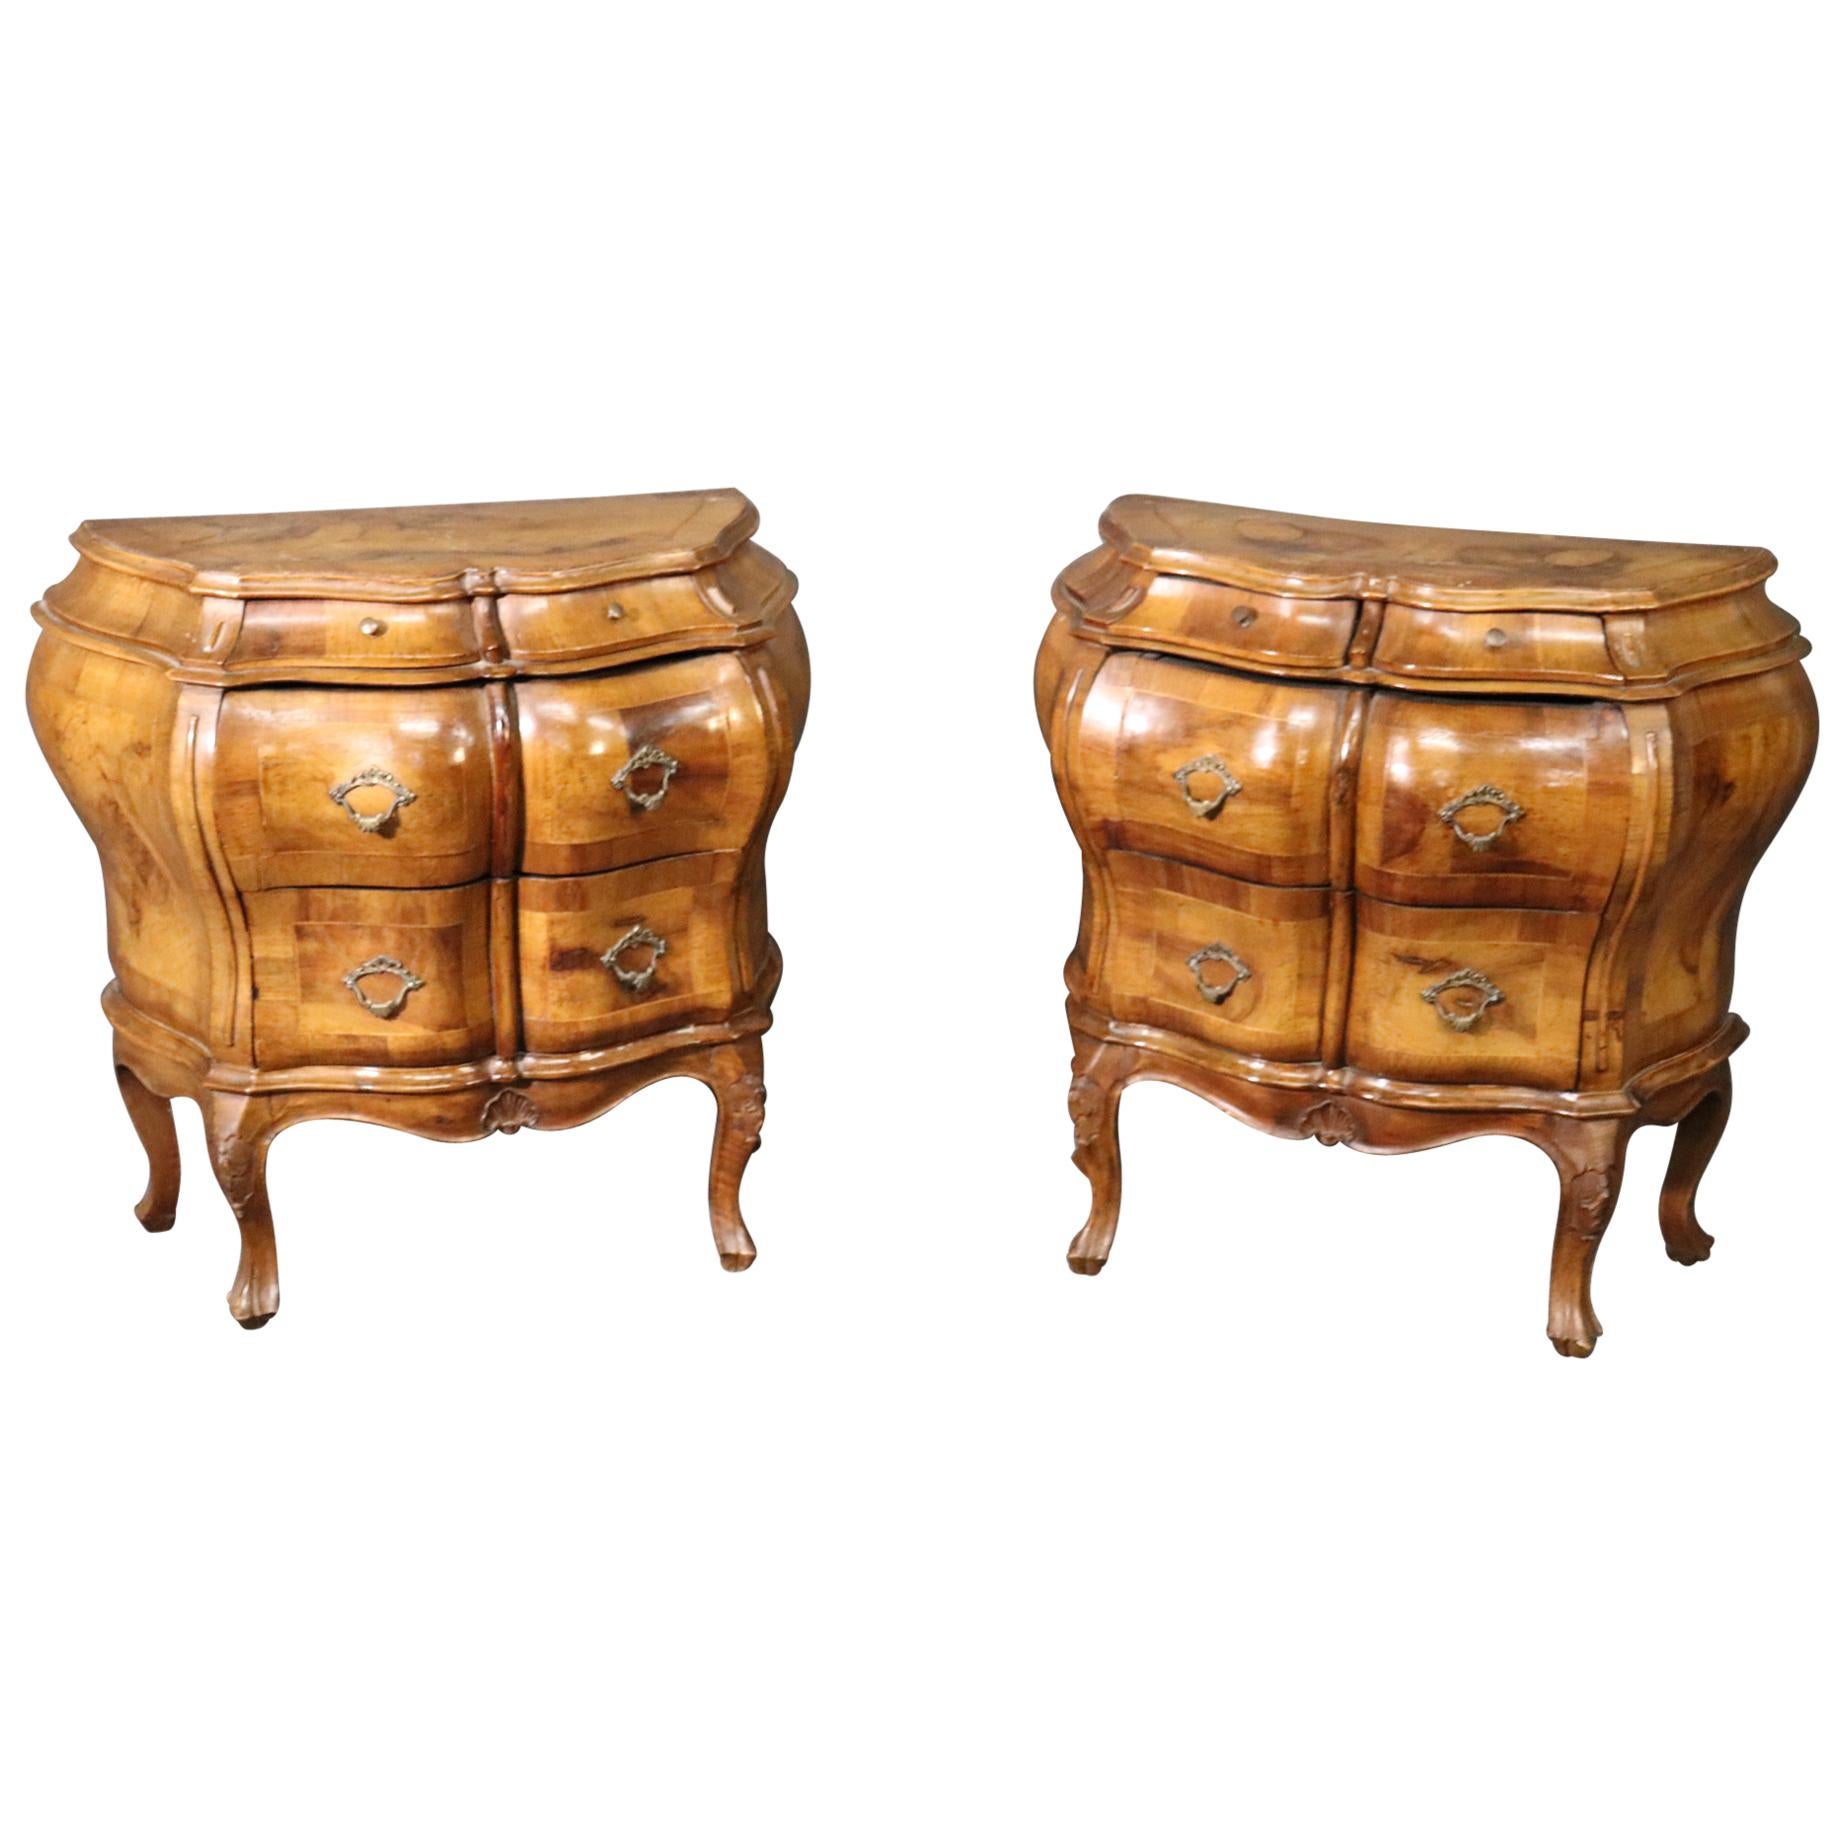 Pair of Bombe Italian Rococo Burled Olive Wood Nightstands Commodes, circa 1940